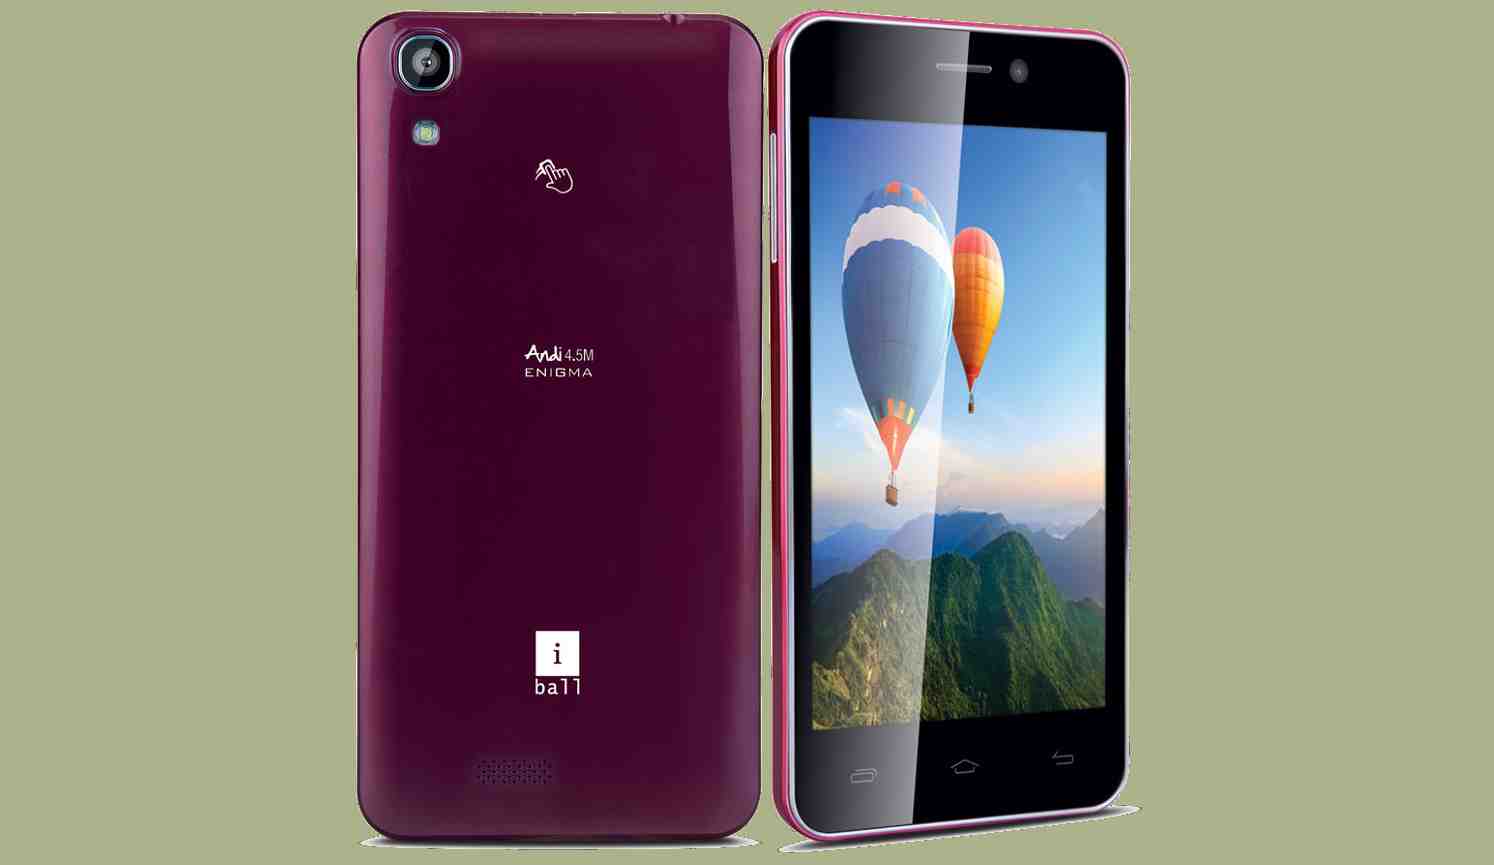 iBall Andi 4.5M Enigma with front-facing 8MP camera launched for Rs 8,499